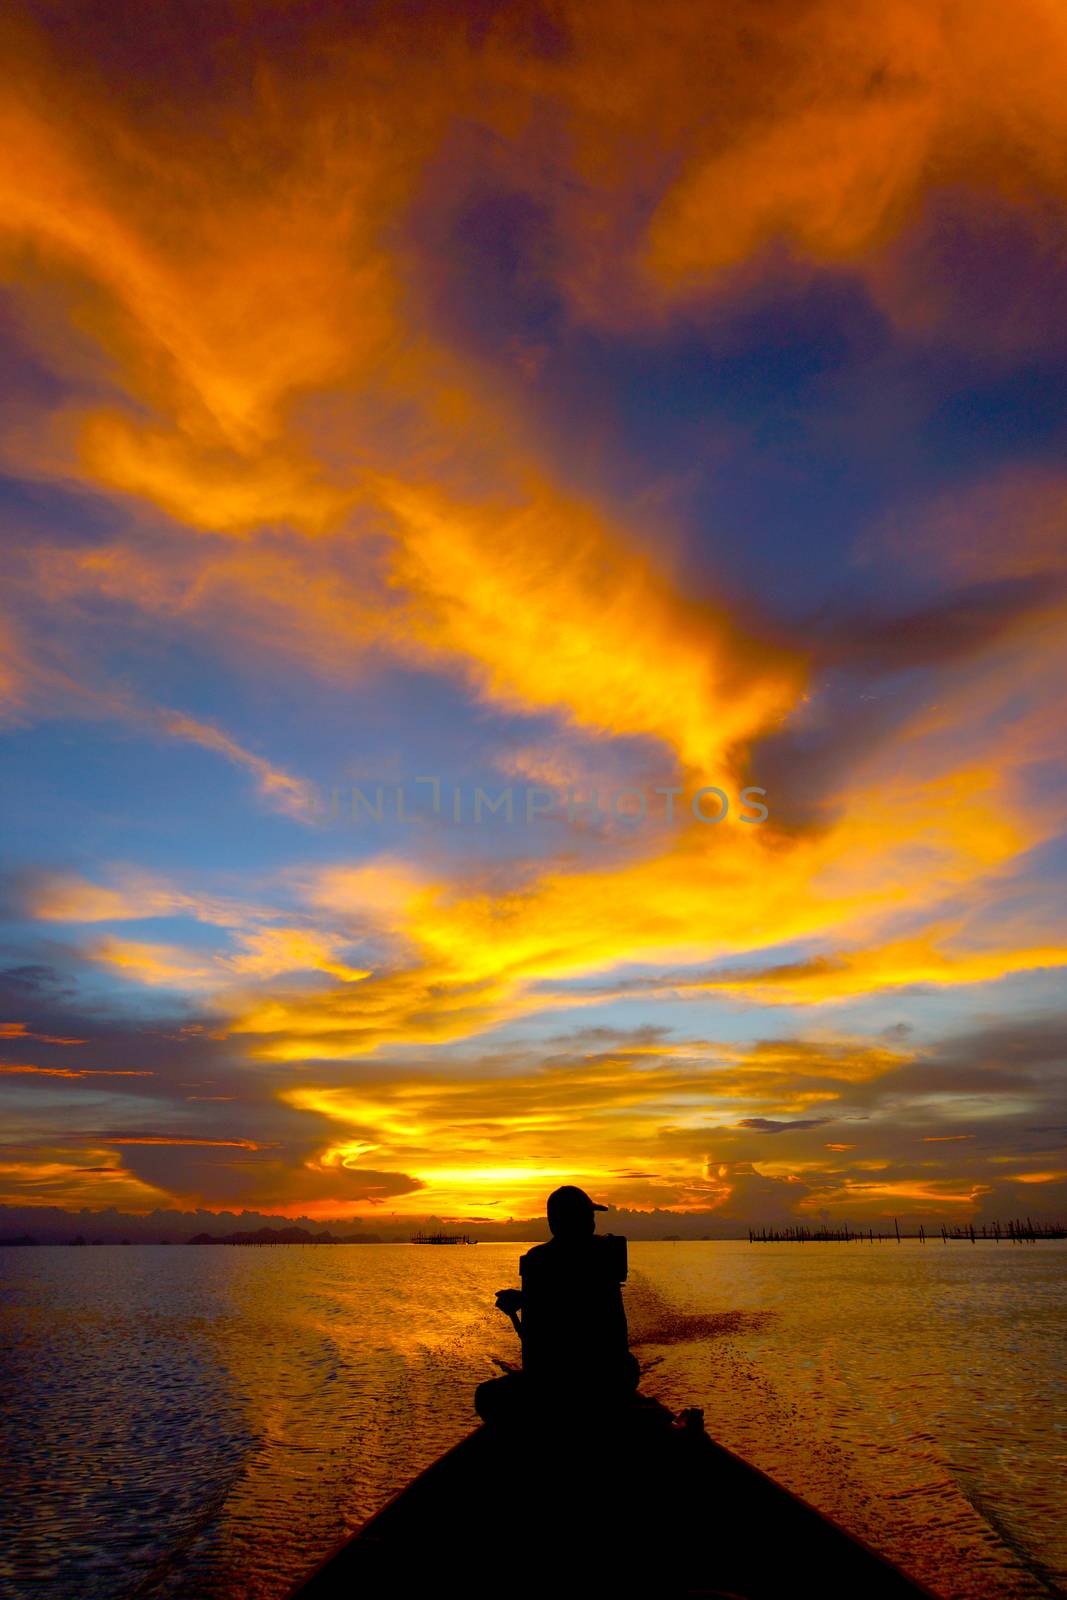 Lonely men silhouettes on sunset sky beautiful lagoon